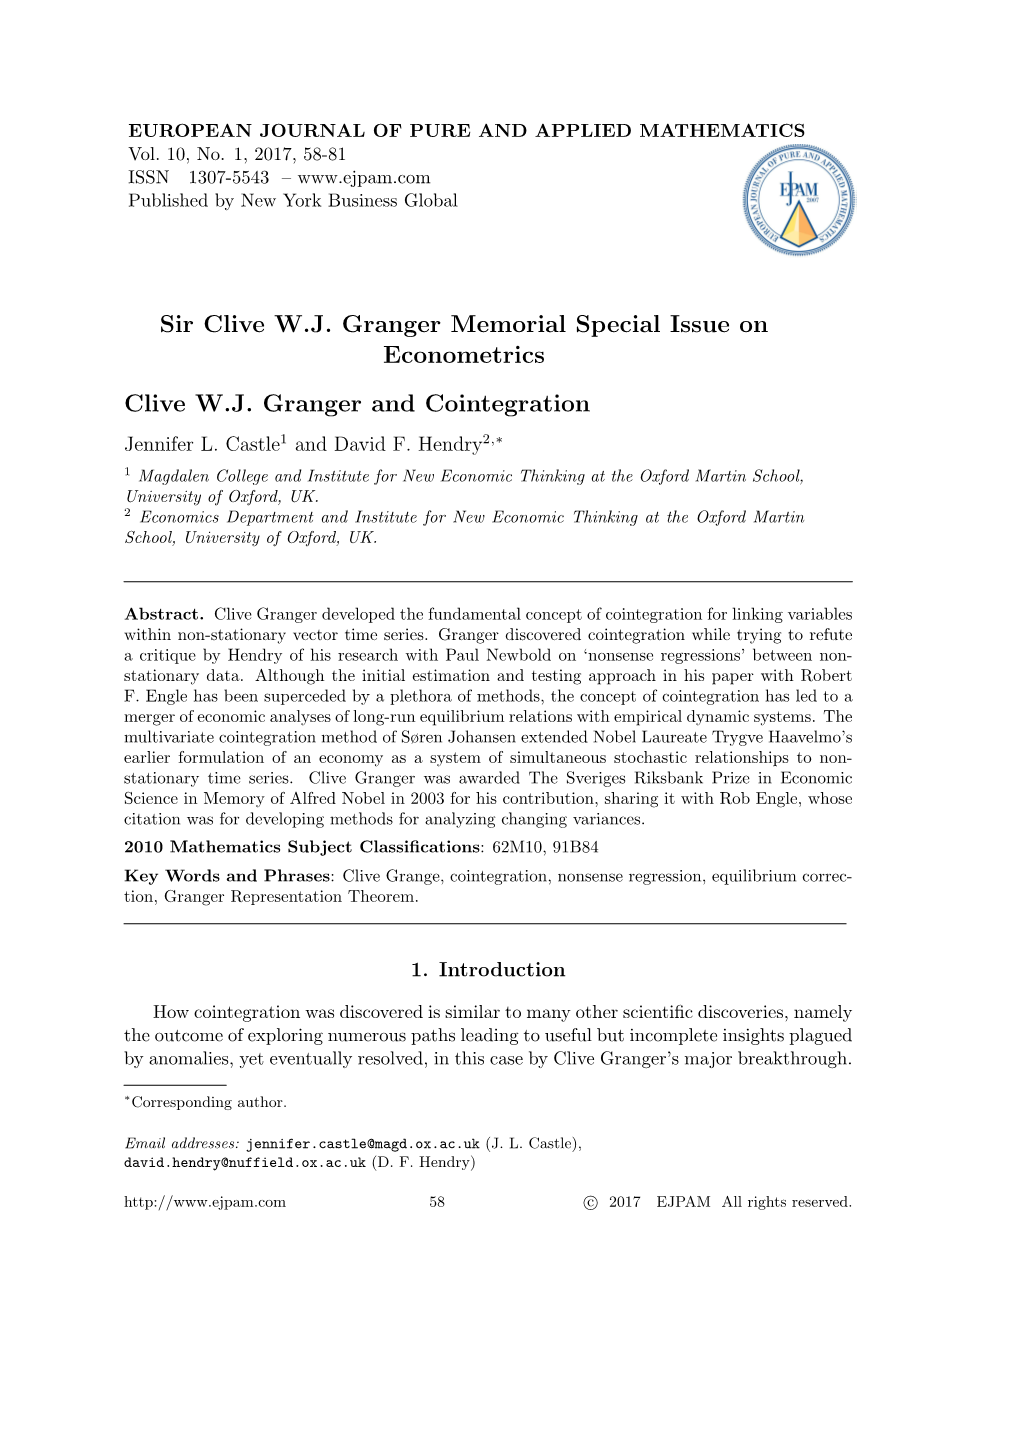 Sir Clive W.J. Granger Memorial Special Issue on Econometrics Clive W.J